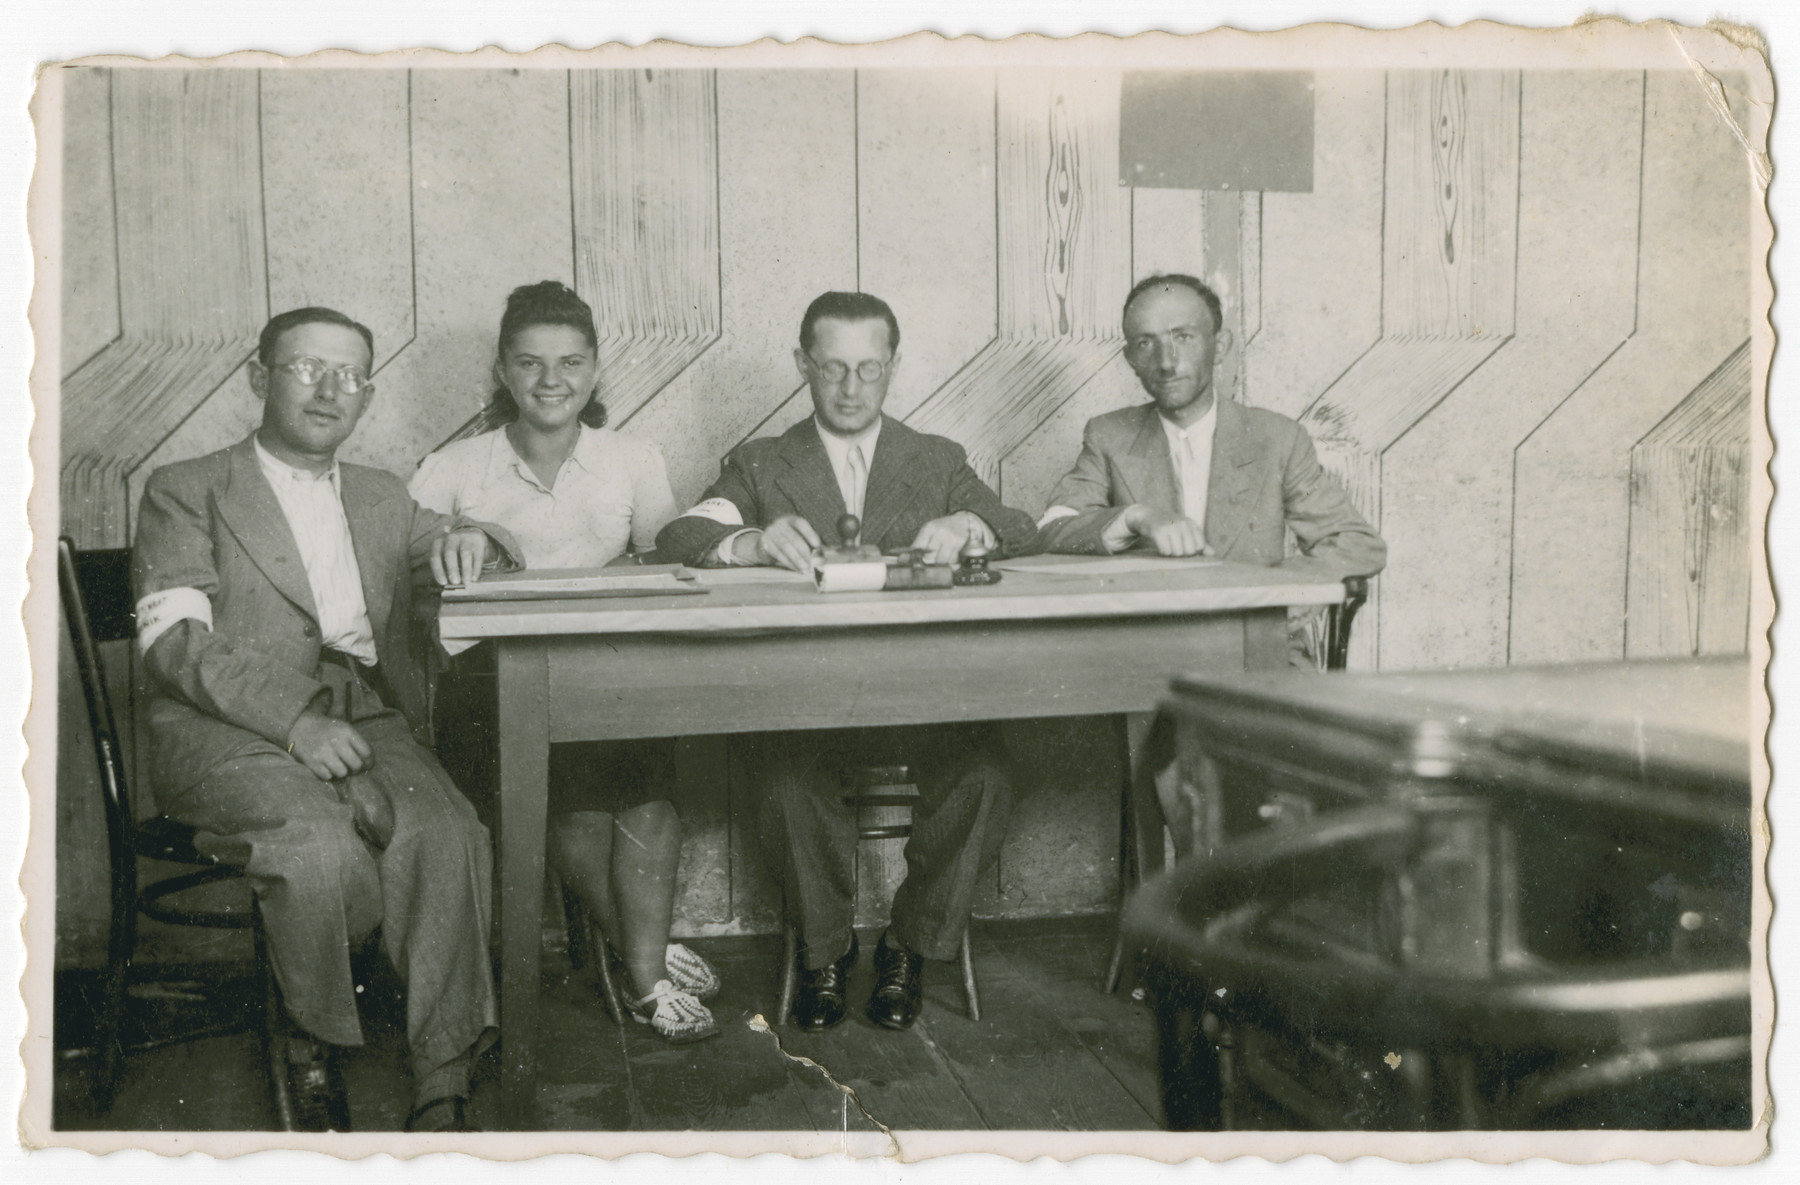 Members of the Jewish Council in Chmielnik seated at a table. 

Pictured from left to right are "Scyzoryk," Bluma Kleinhandler, Abram Langwald (president), and Chaim Dab (Domb, secretary).